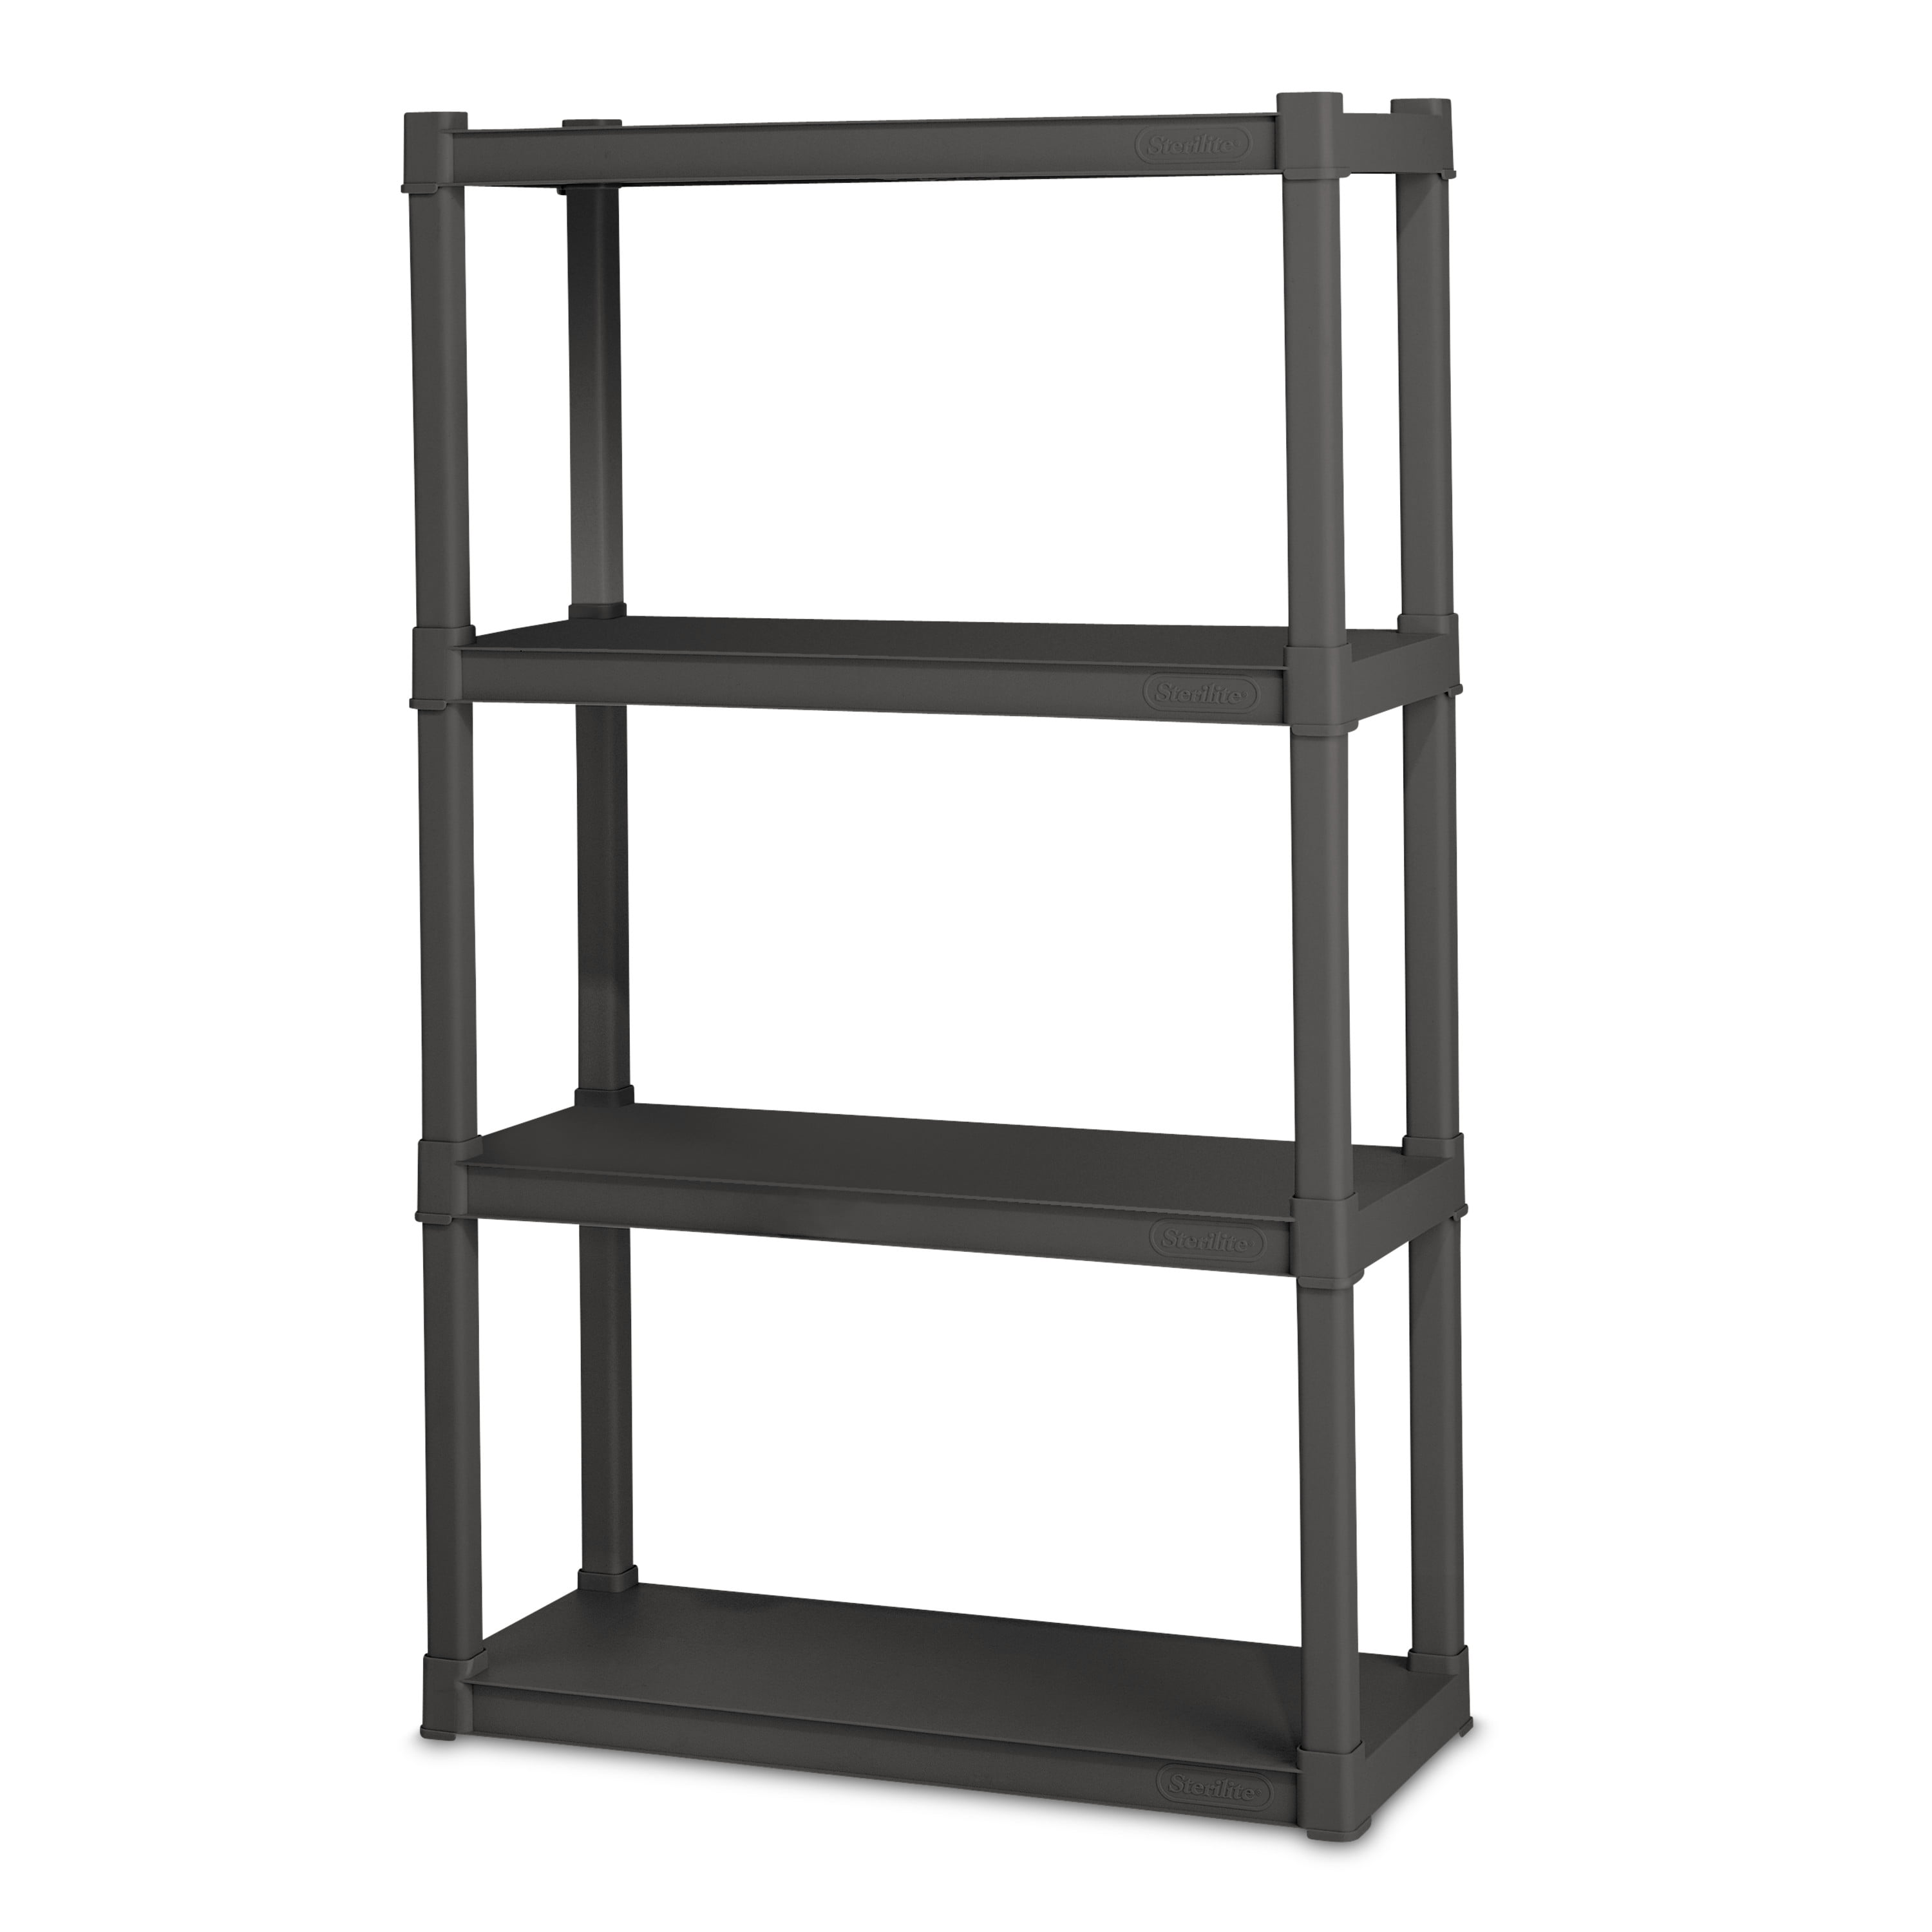 Ram Quality Products Optimo 16 inch 5 Tier Plastic Storage Shelves Black 